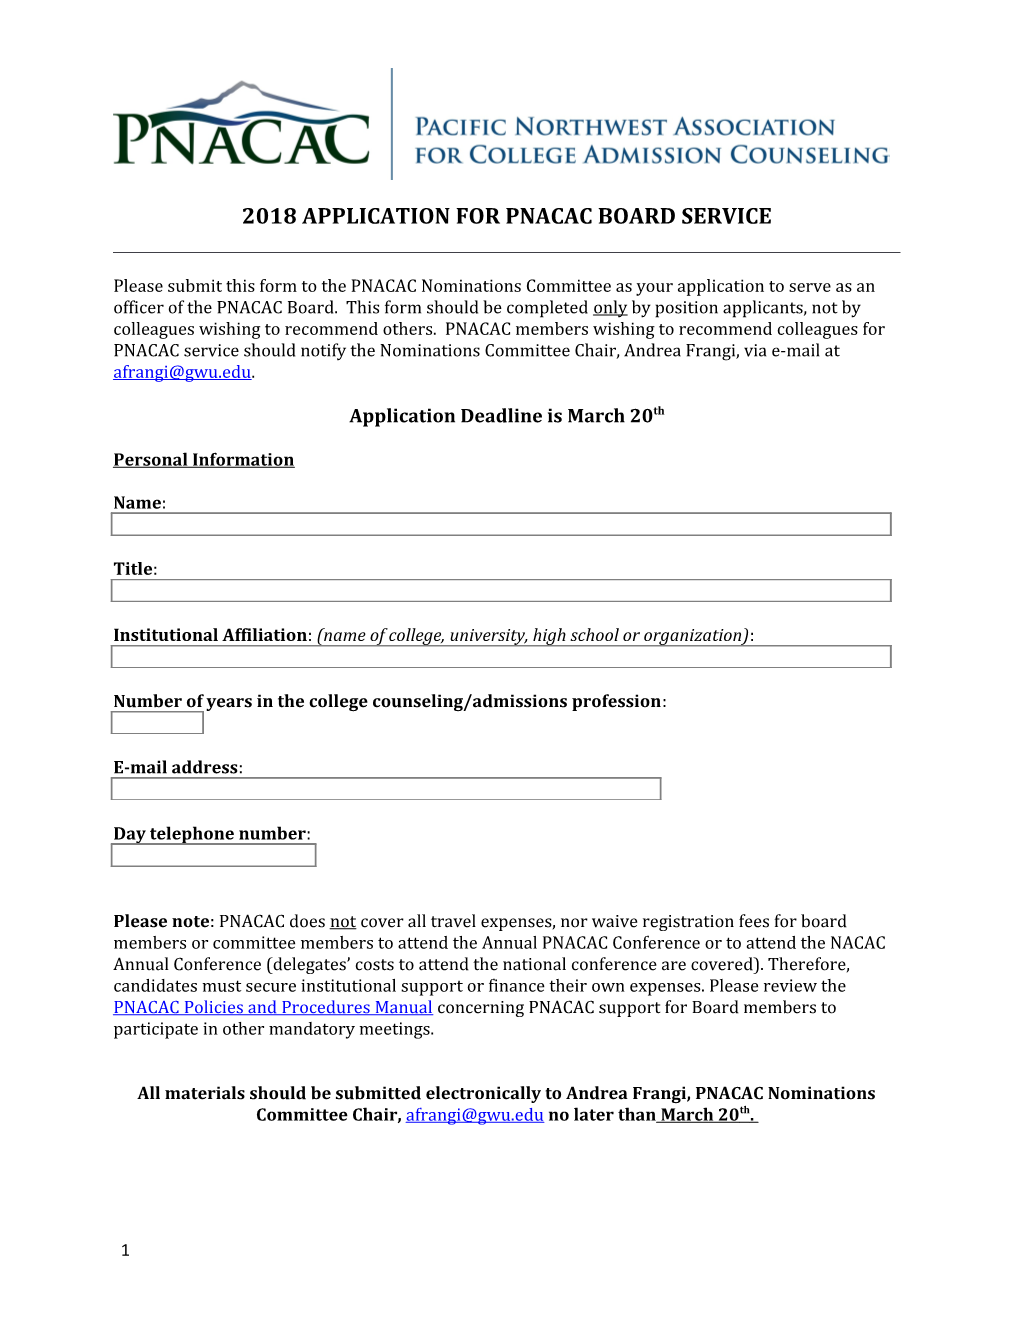 2018 Application for Pnacac Board Service